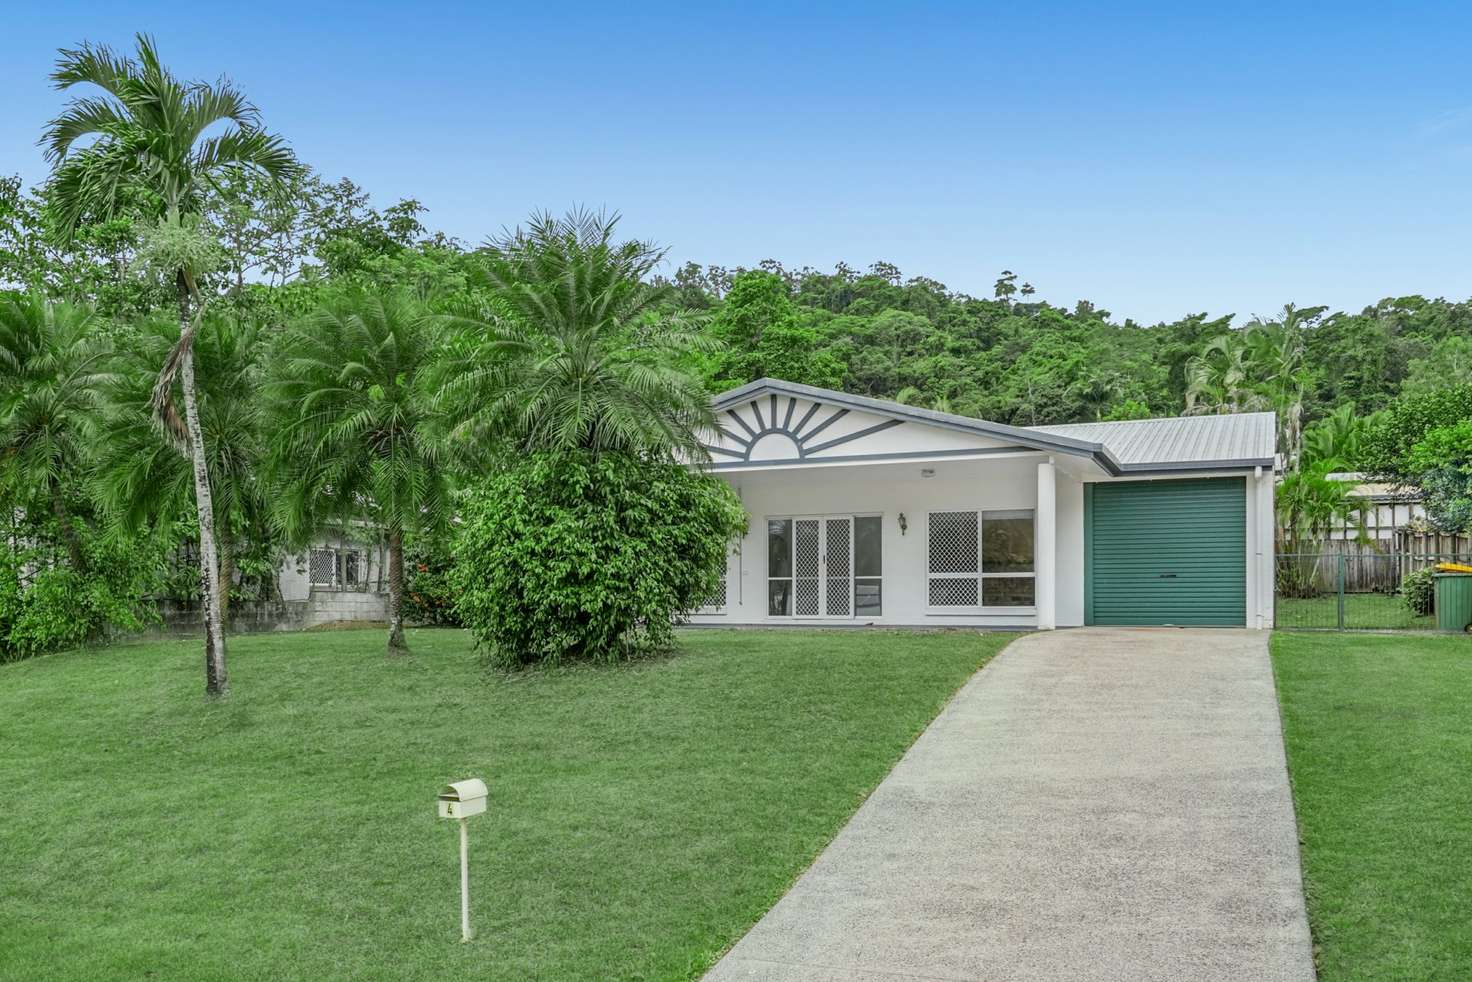 Main view of Homely house listing, 4 Butland Street, Brinsmead QLD 4870